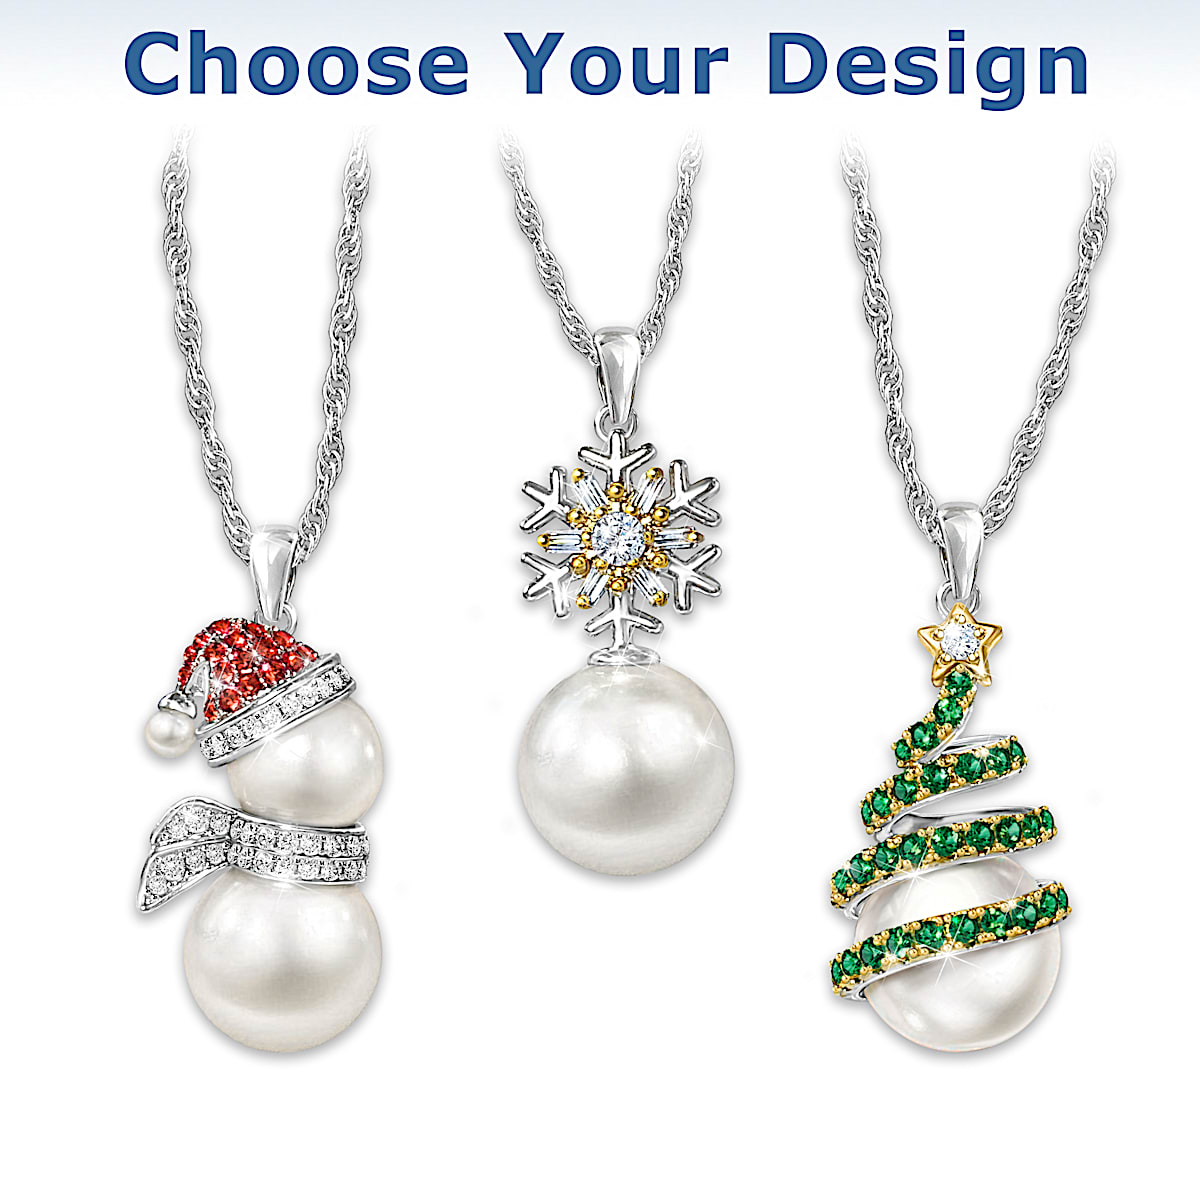 Pearls Of Joy 18K-Gold & Silver-Plated Pendant Necklace Adorned With  Simulated Pearls And Crystal Paves With Your Choice Of 3 Christmas-Themed  Designs